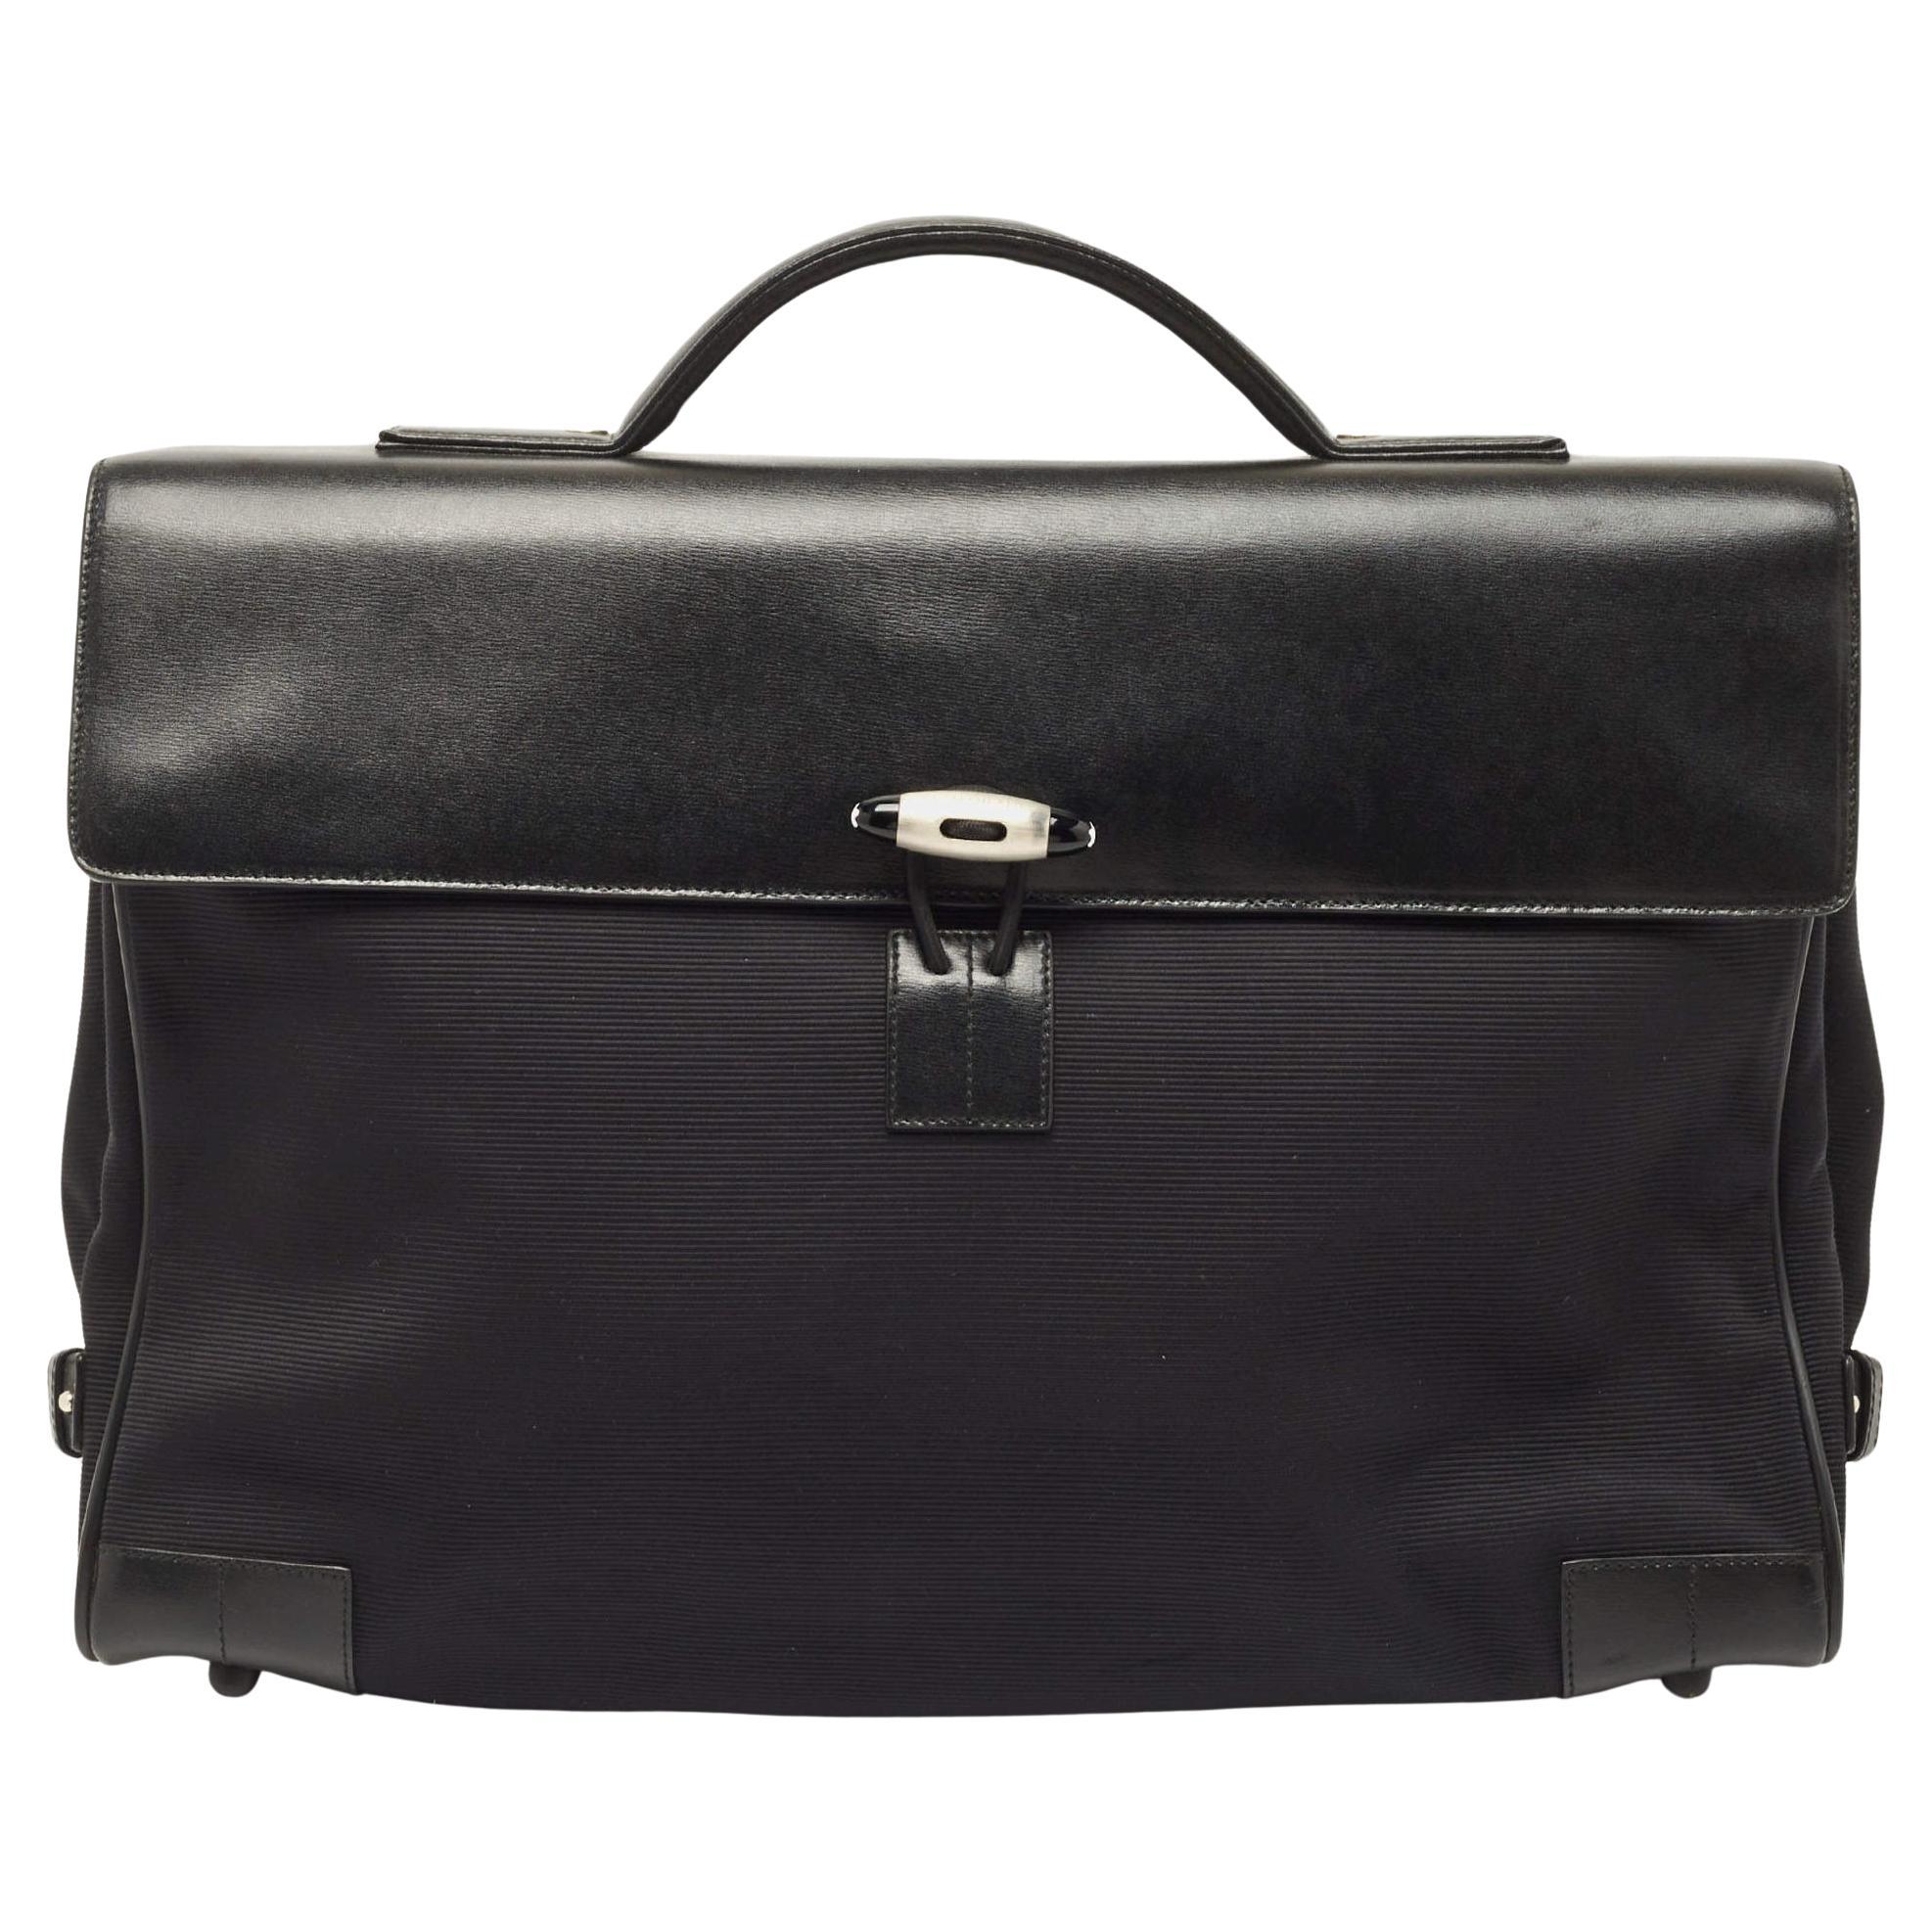 Montblanc Black Fabric and Leather Double Gusset Nightflight Briefcase